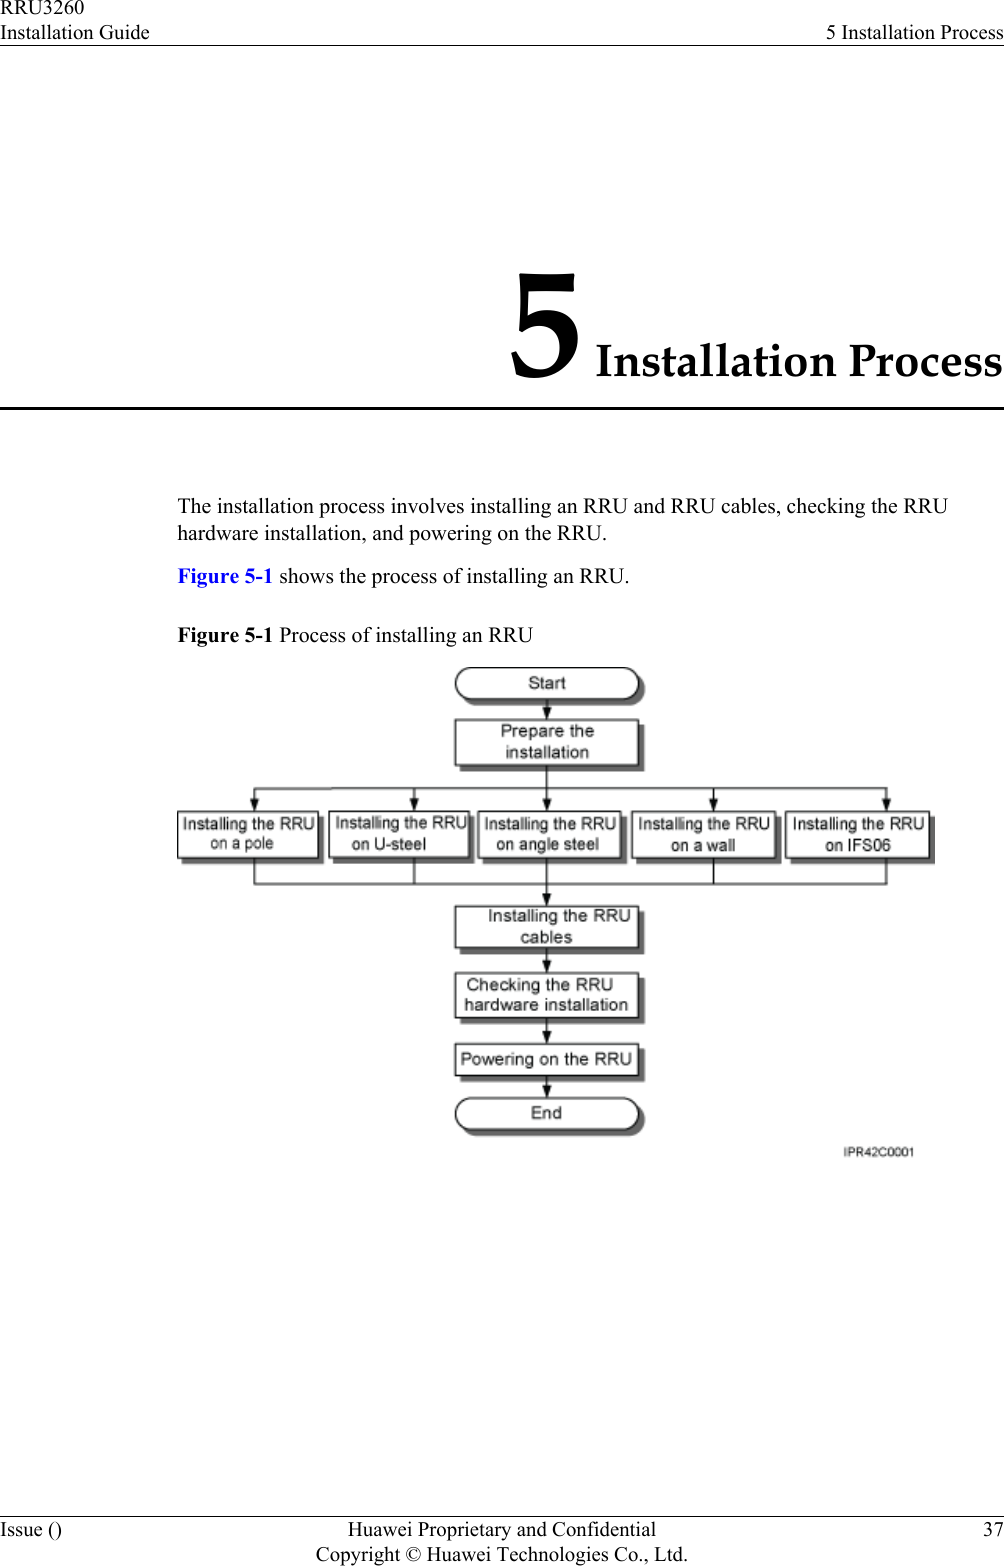 5 Installation ProcessThe installation process involves installing an RRU and RRU cables, checking the RRUhardware installation, and powering on the RRU.Figure 5-1 shows the process of installing an RRU.Figure 5-1 Process of installing an RRURRU3260Installation Guide 5 Installation ProcessIssue () Huawei Proprietary and ConfidentialCopyright © Huawei Technologies Co., Ltd.37